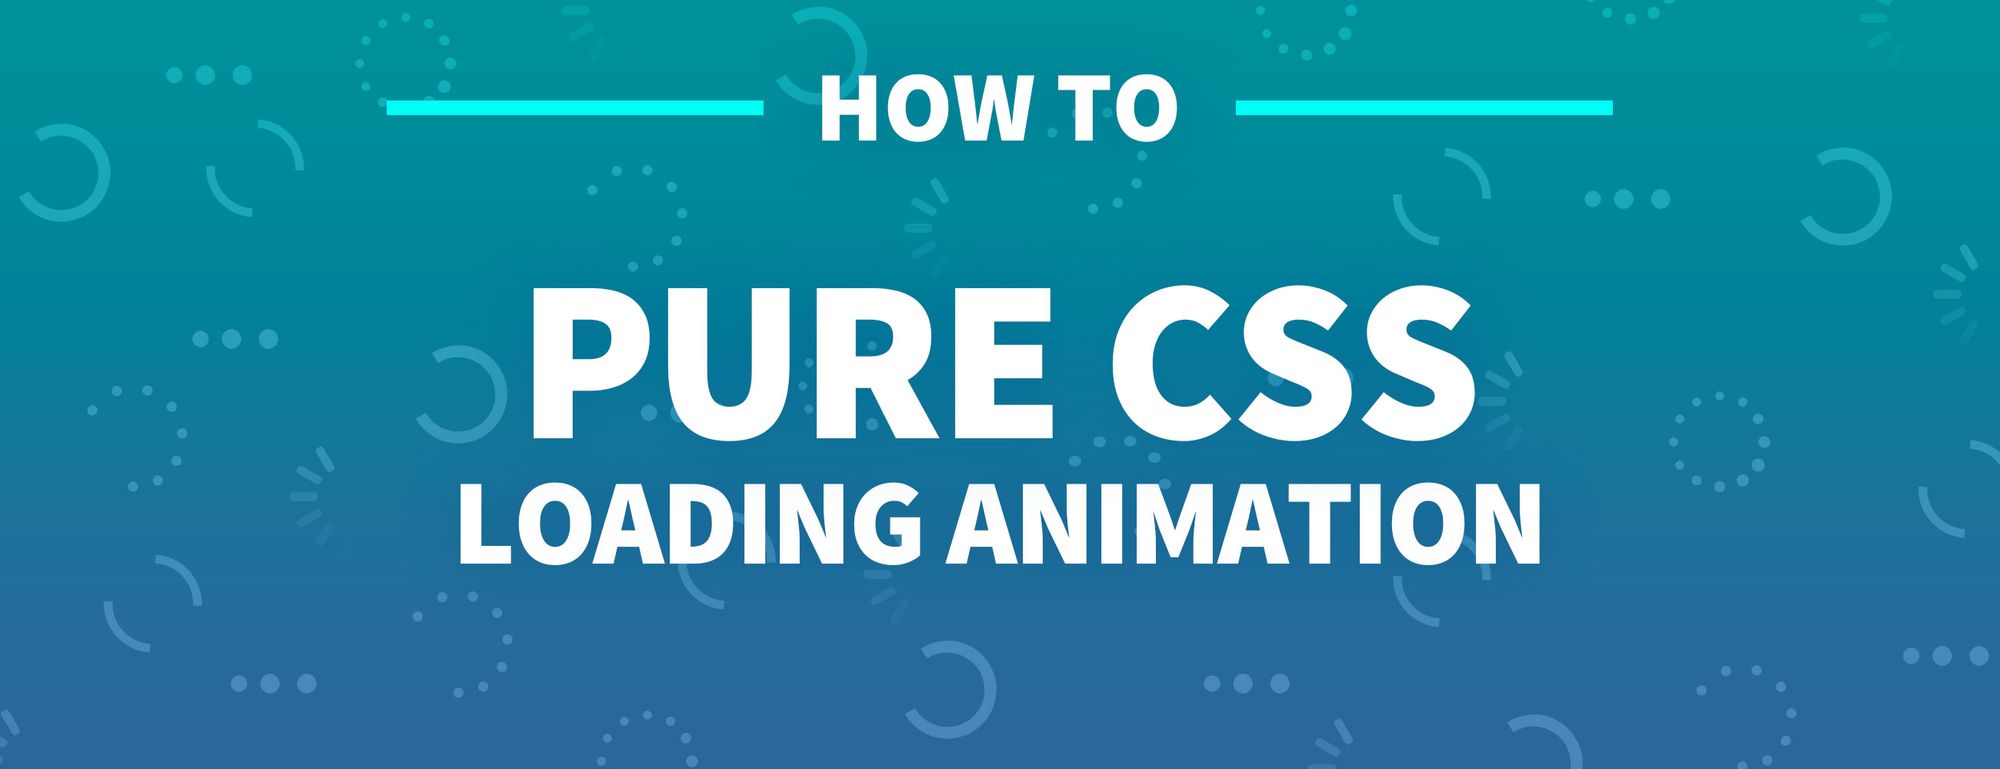 How to Use Pure CSS to Create a Beautiful Loading Animation for your App